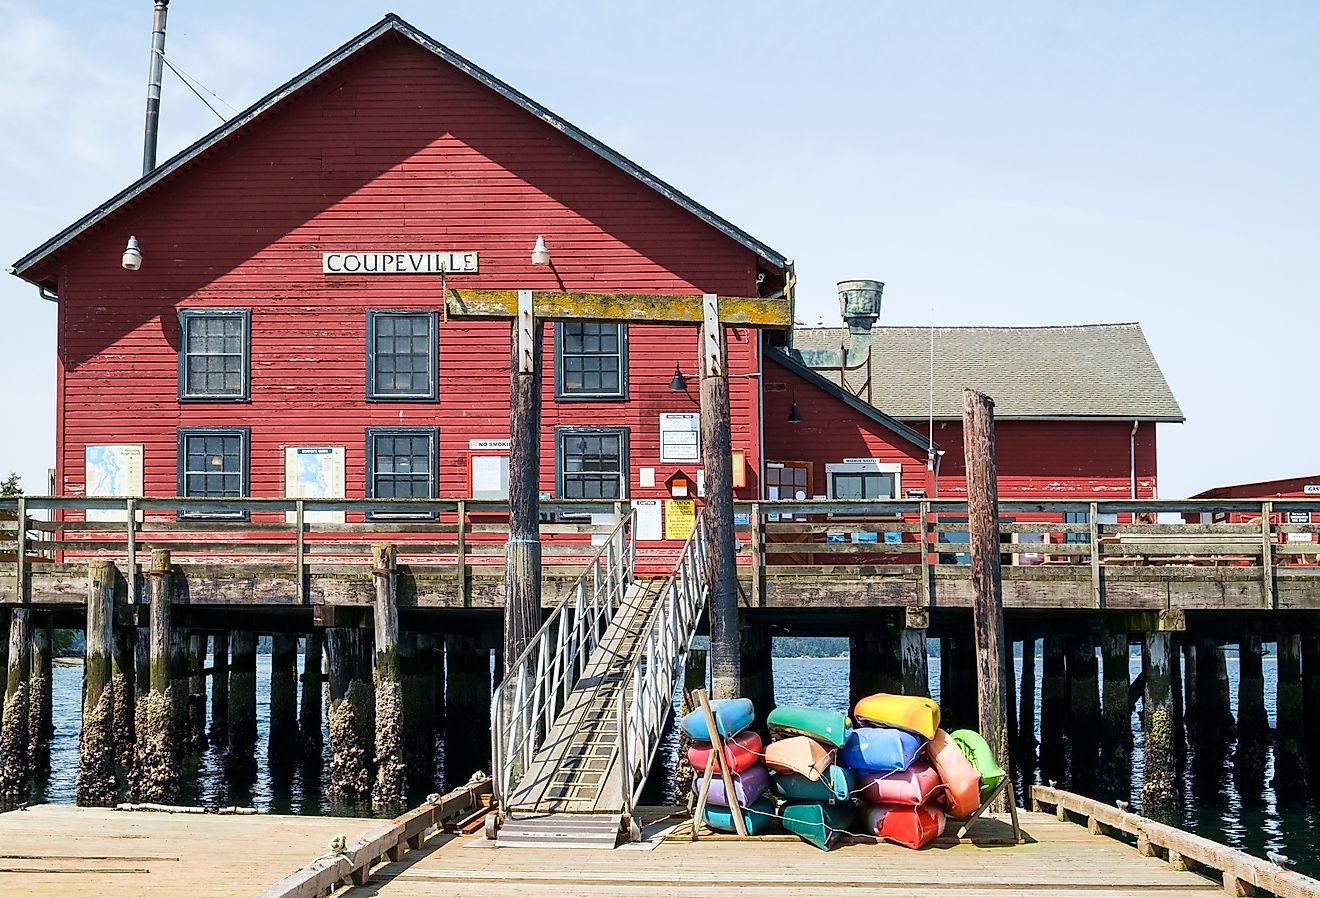 Rental kayaks of various colors at historic Coupeville Wharf which also houses the marina offices